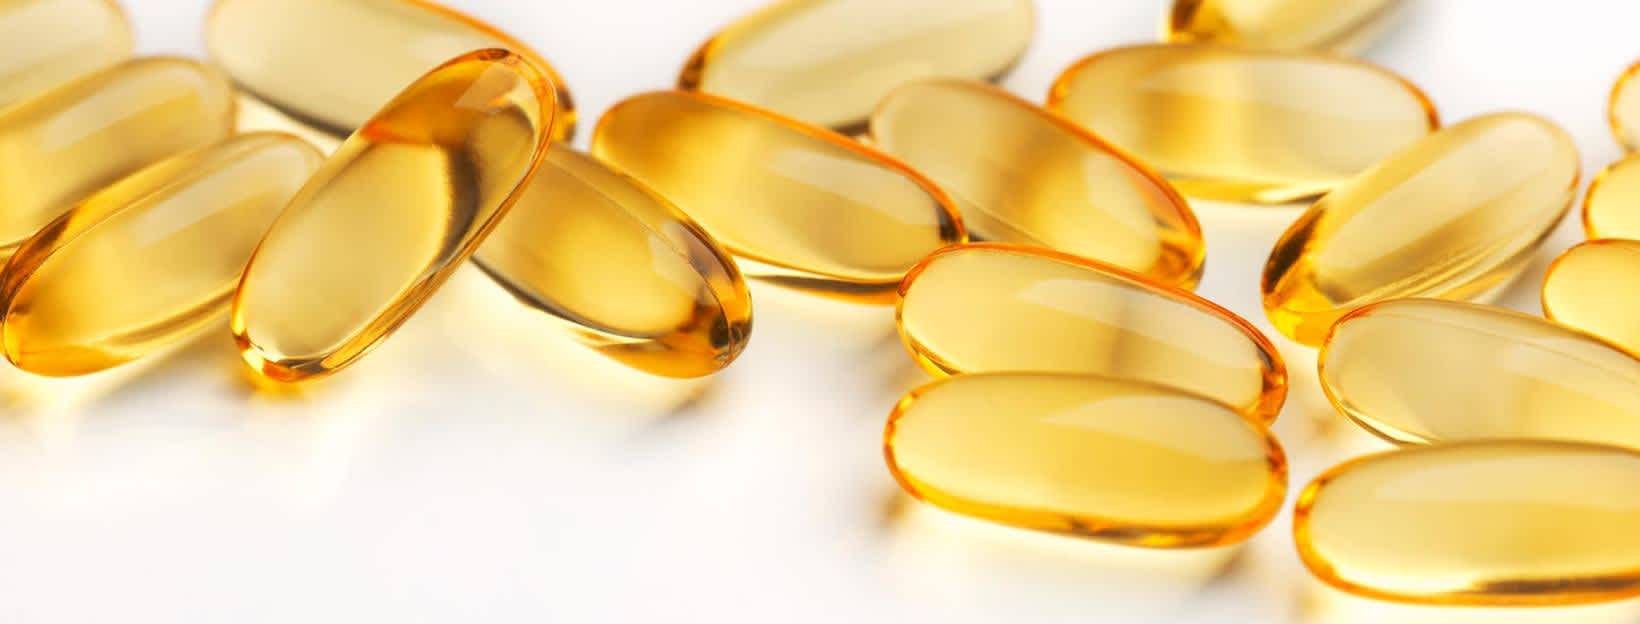 Can You Take Fish Oil with Blood Pressure Medication?